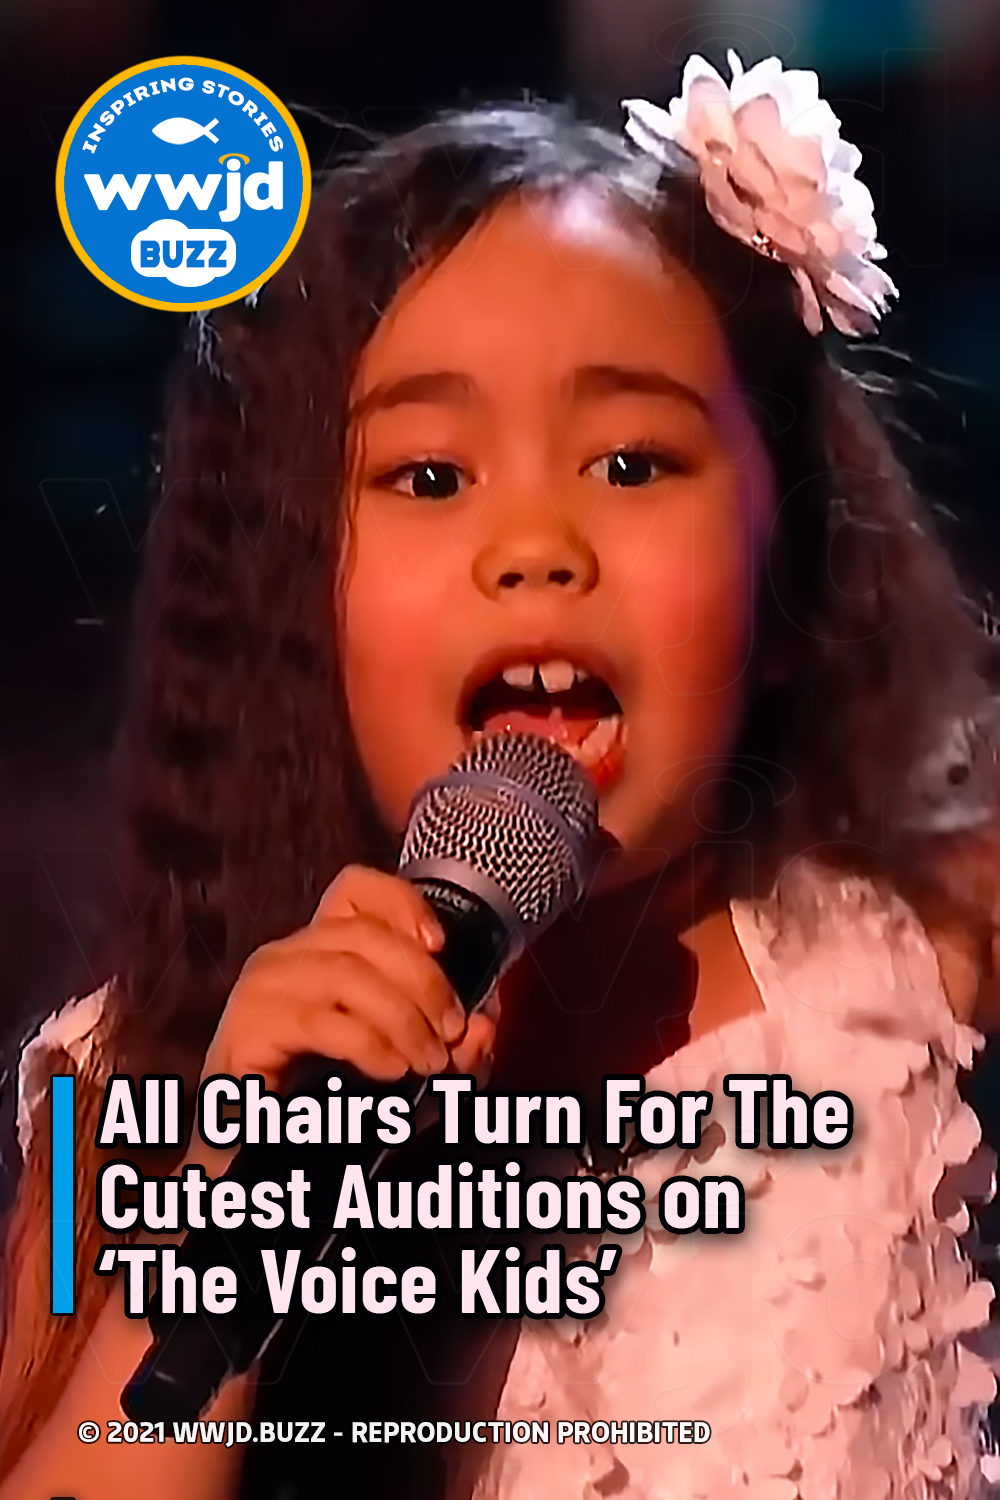 All Chairs Turn For The Cutest Auditions on \'The Voice Kids\'